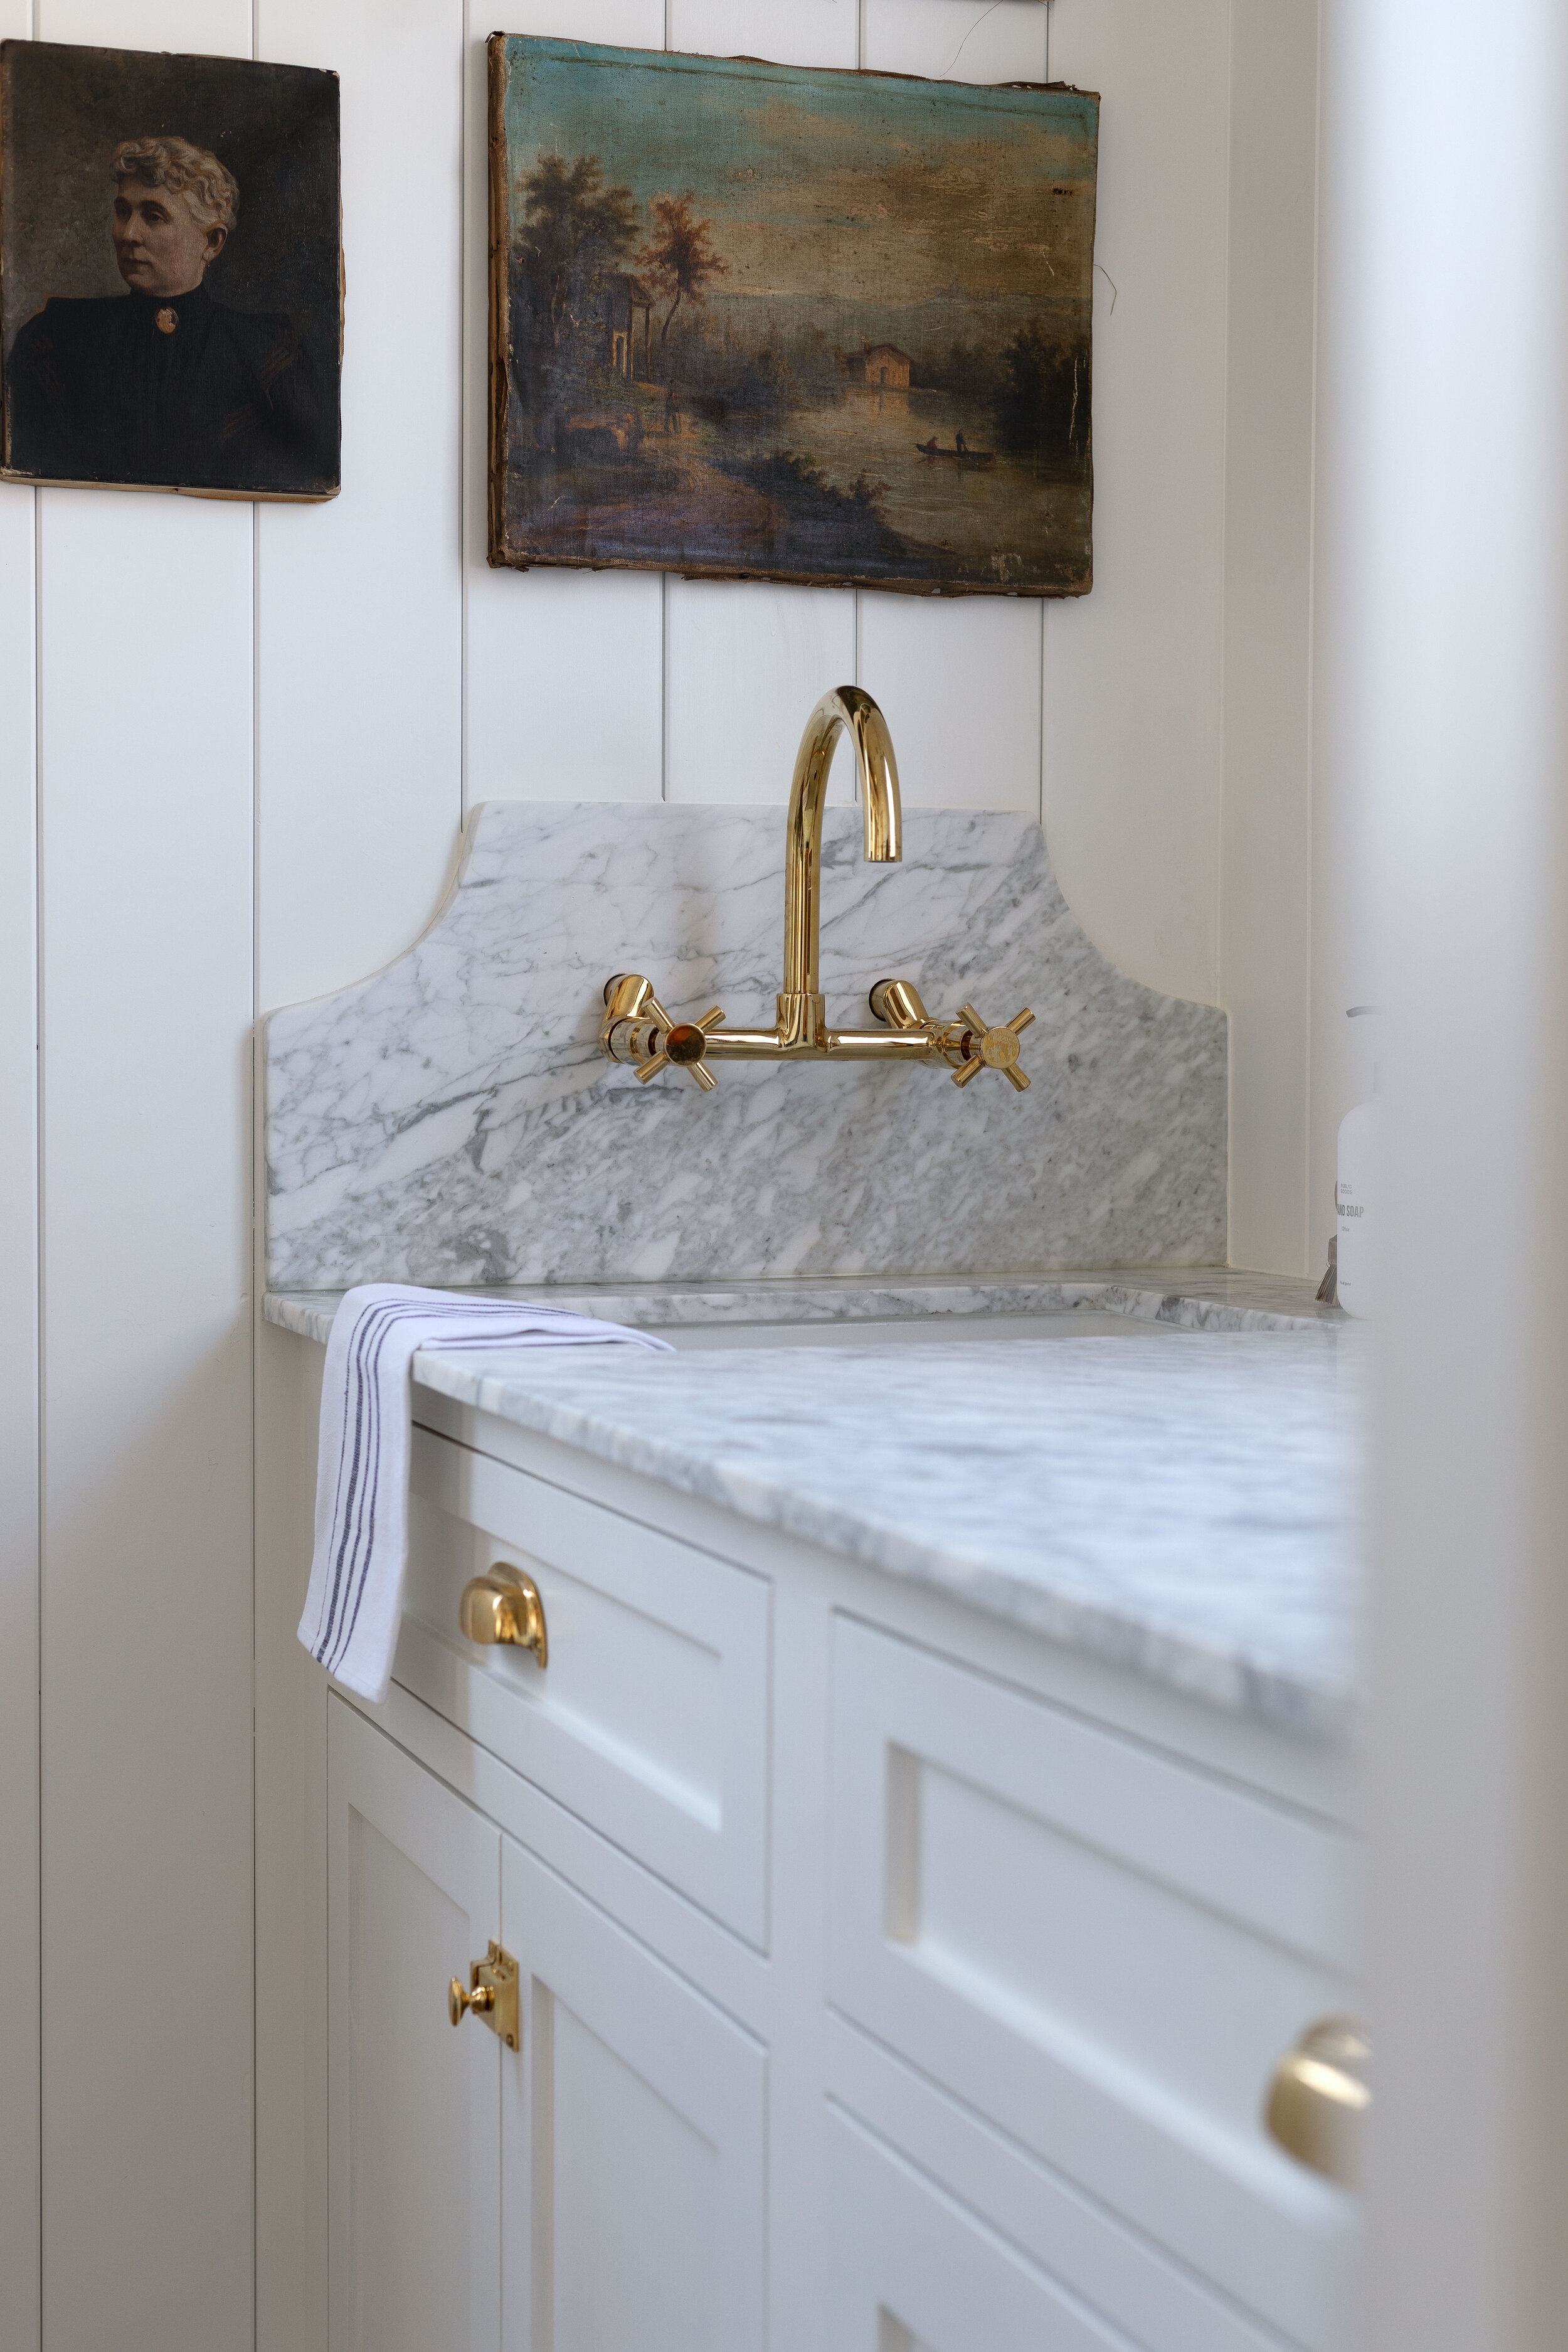 Diy How To Remove Stains From Marble, Cleaning Marble Bathroom Countertops